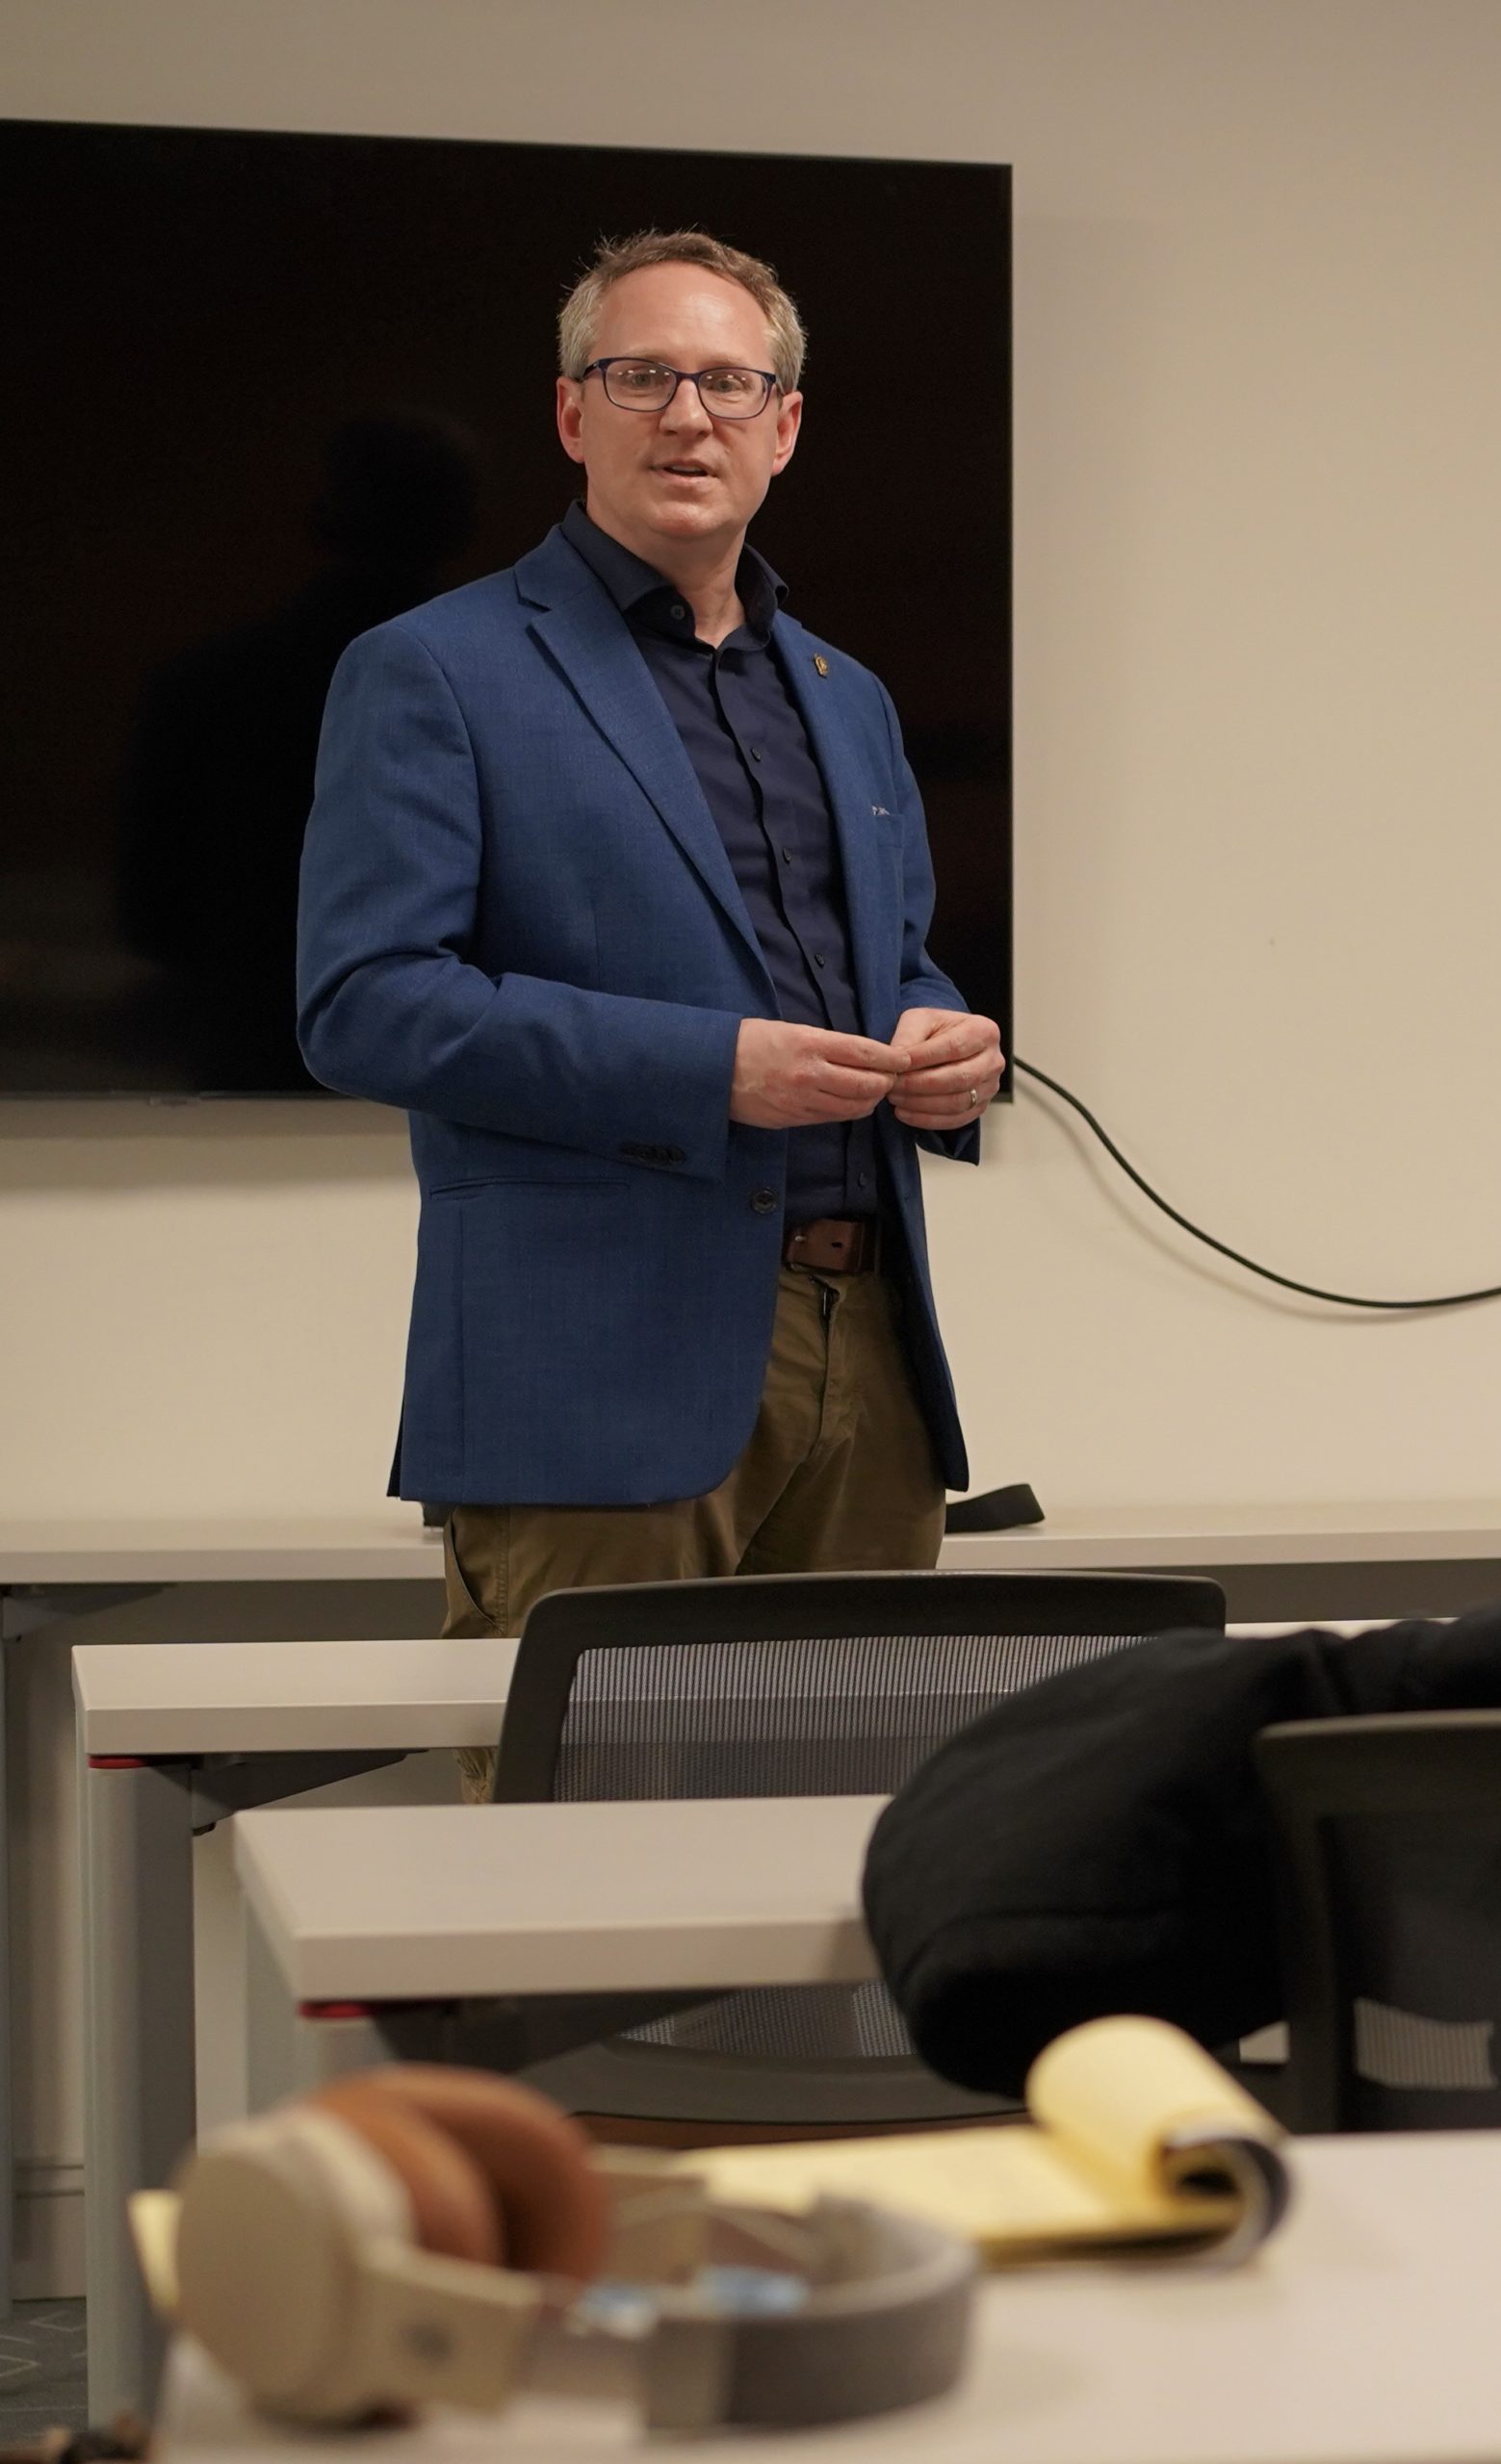 Full color image of Director Scott M. Graves, Startup Rutland presenting during a recent class on business development topics. Blue soprtcoat and shirt, a man wearing glasses, hands come together and speaking to a crowd of adult students.